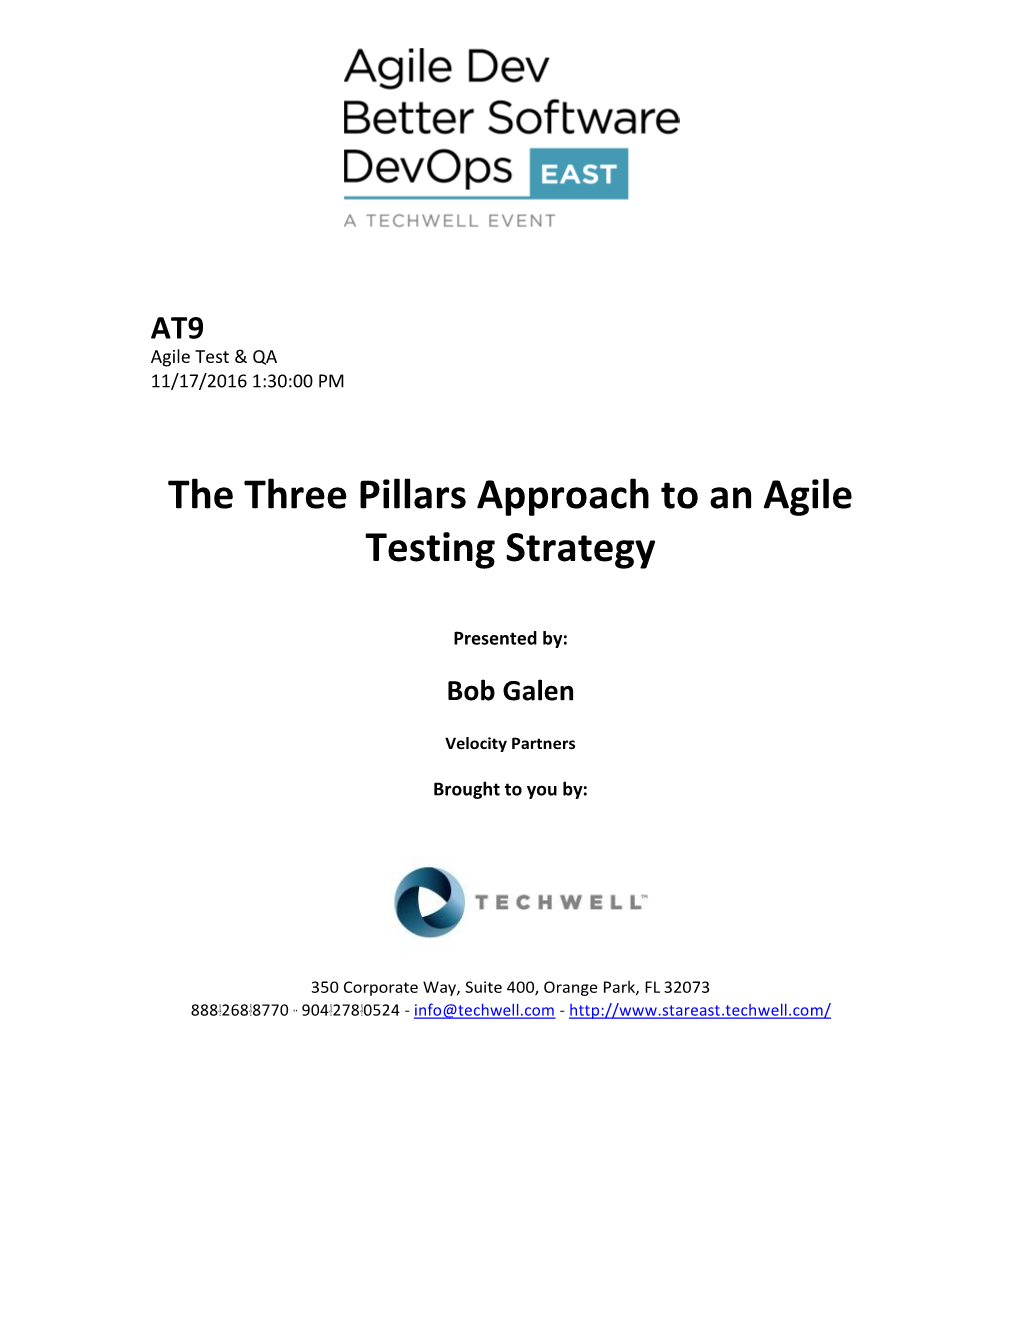 The Three Pillars Approach to an Agile Testing Strategy